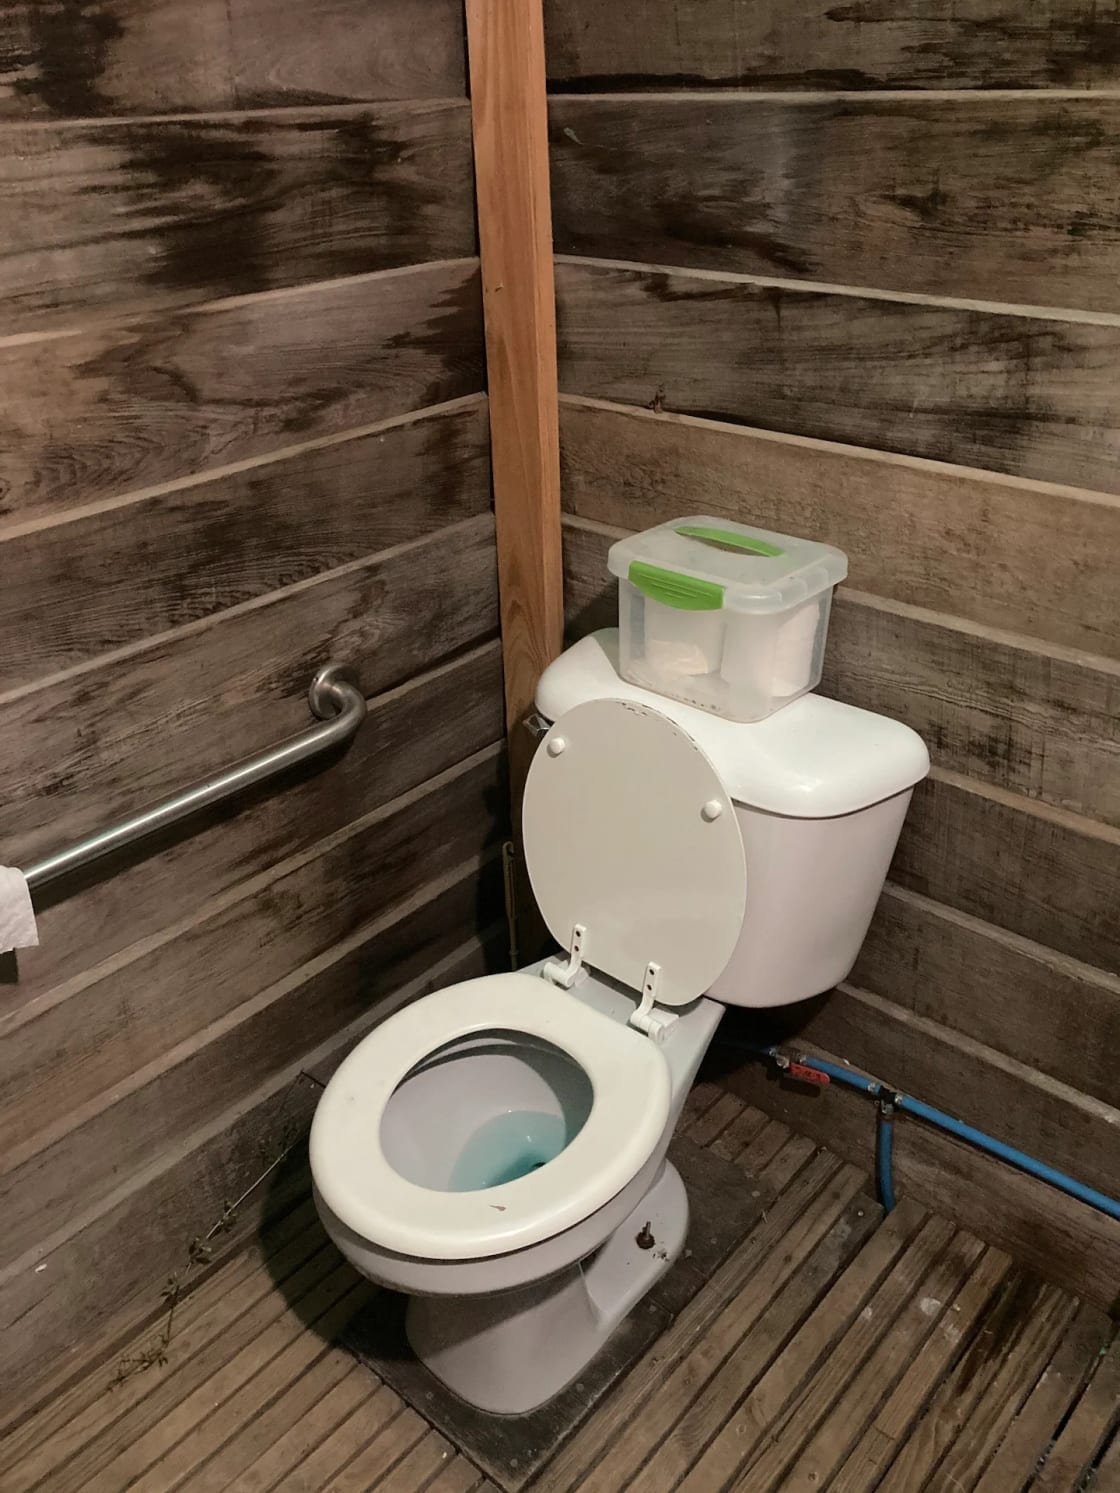 Flush toilet in outhouse